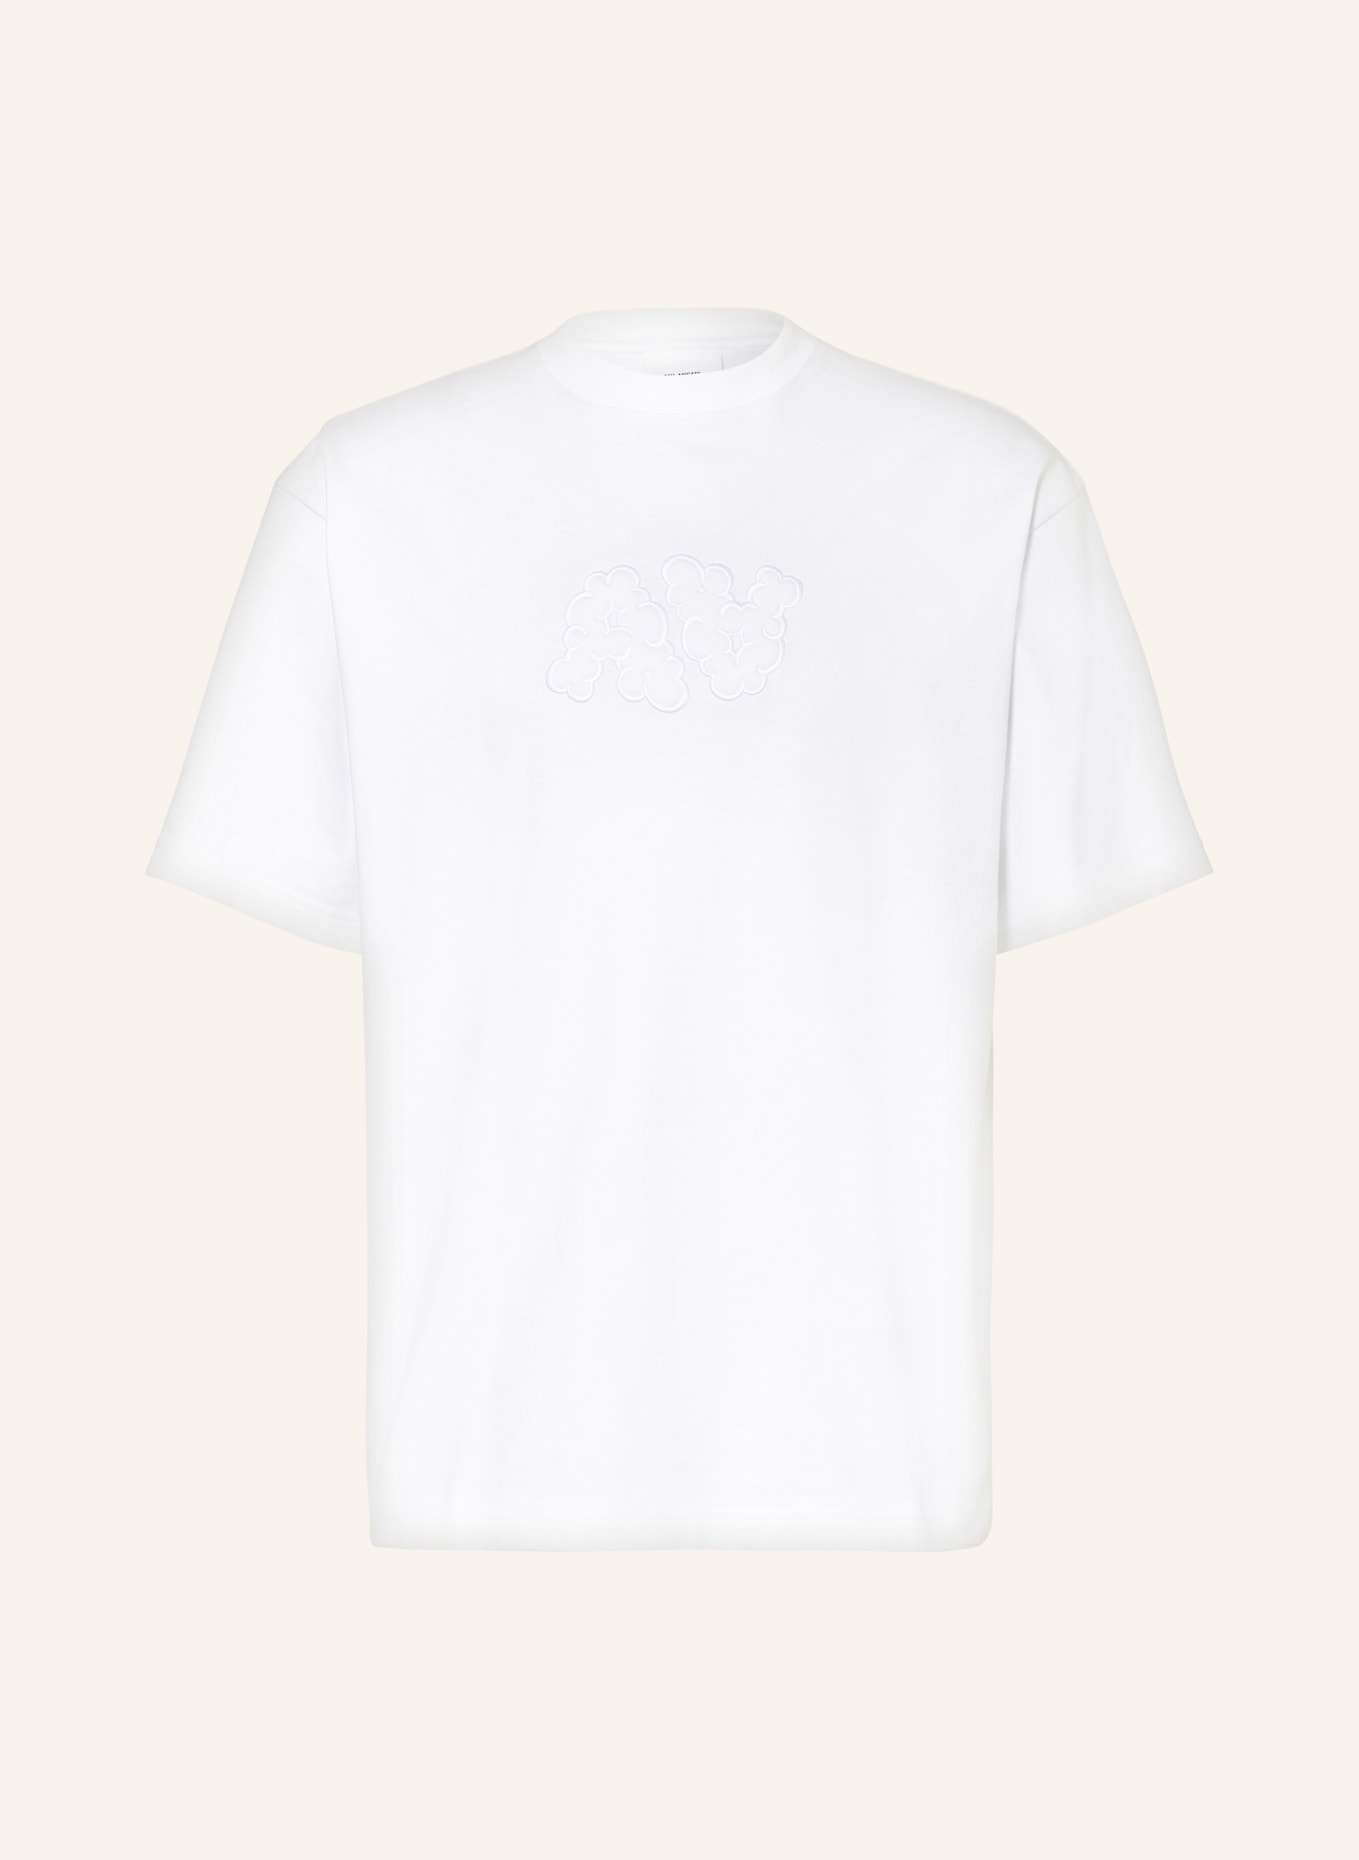 AXEL ARIGATO T-shirt, Color: WHITE (Image 1)